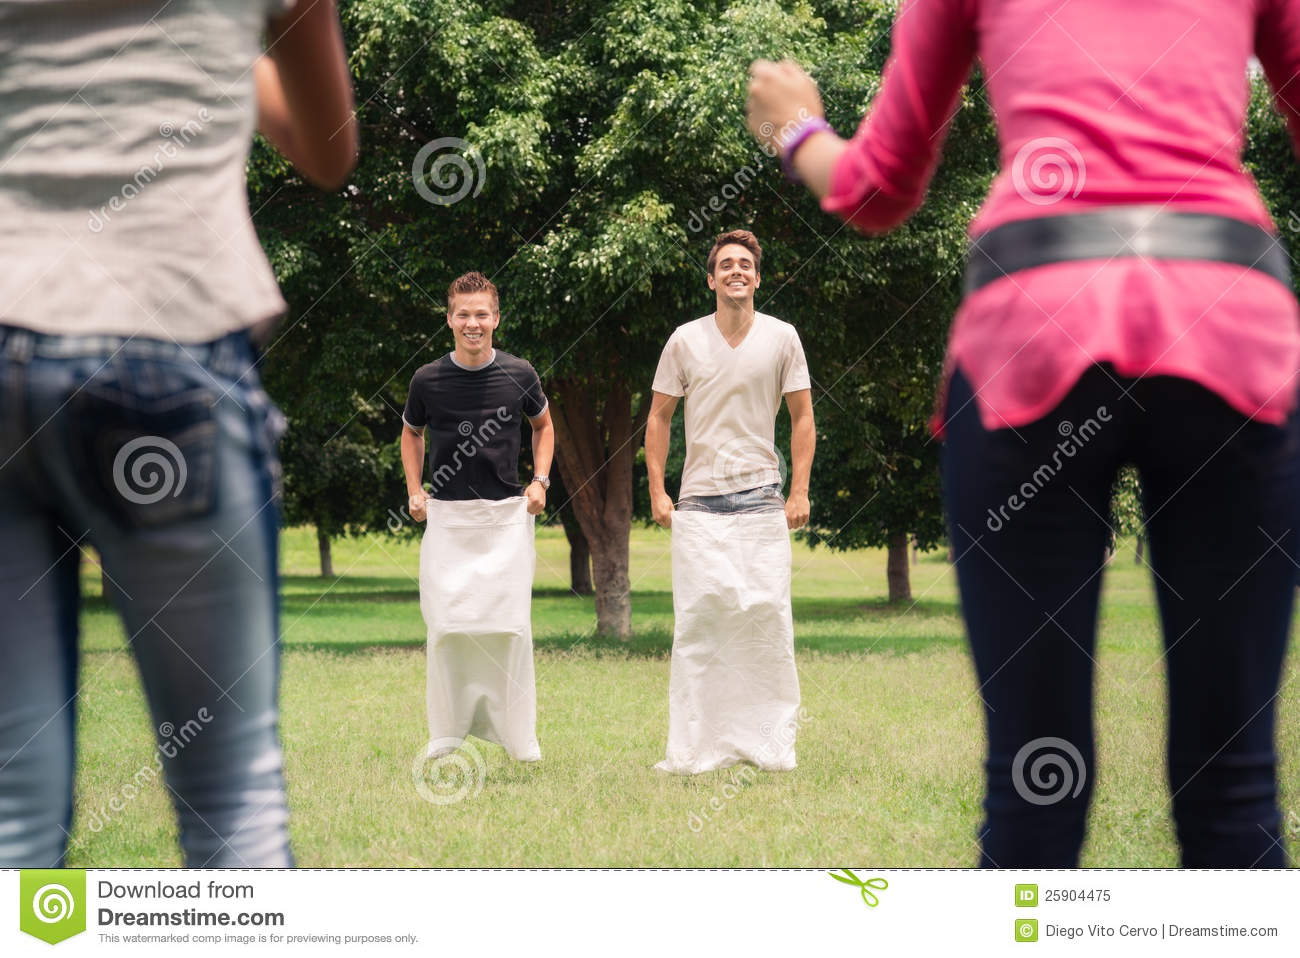     Playing Sack Race In City Park With Women Clapping Hands And Laughing